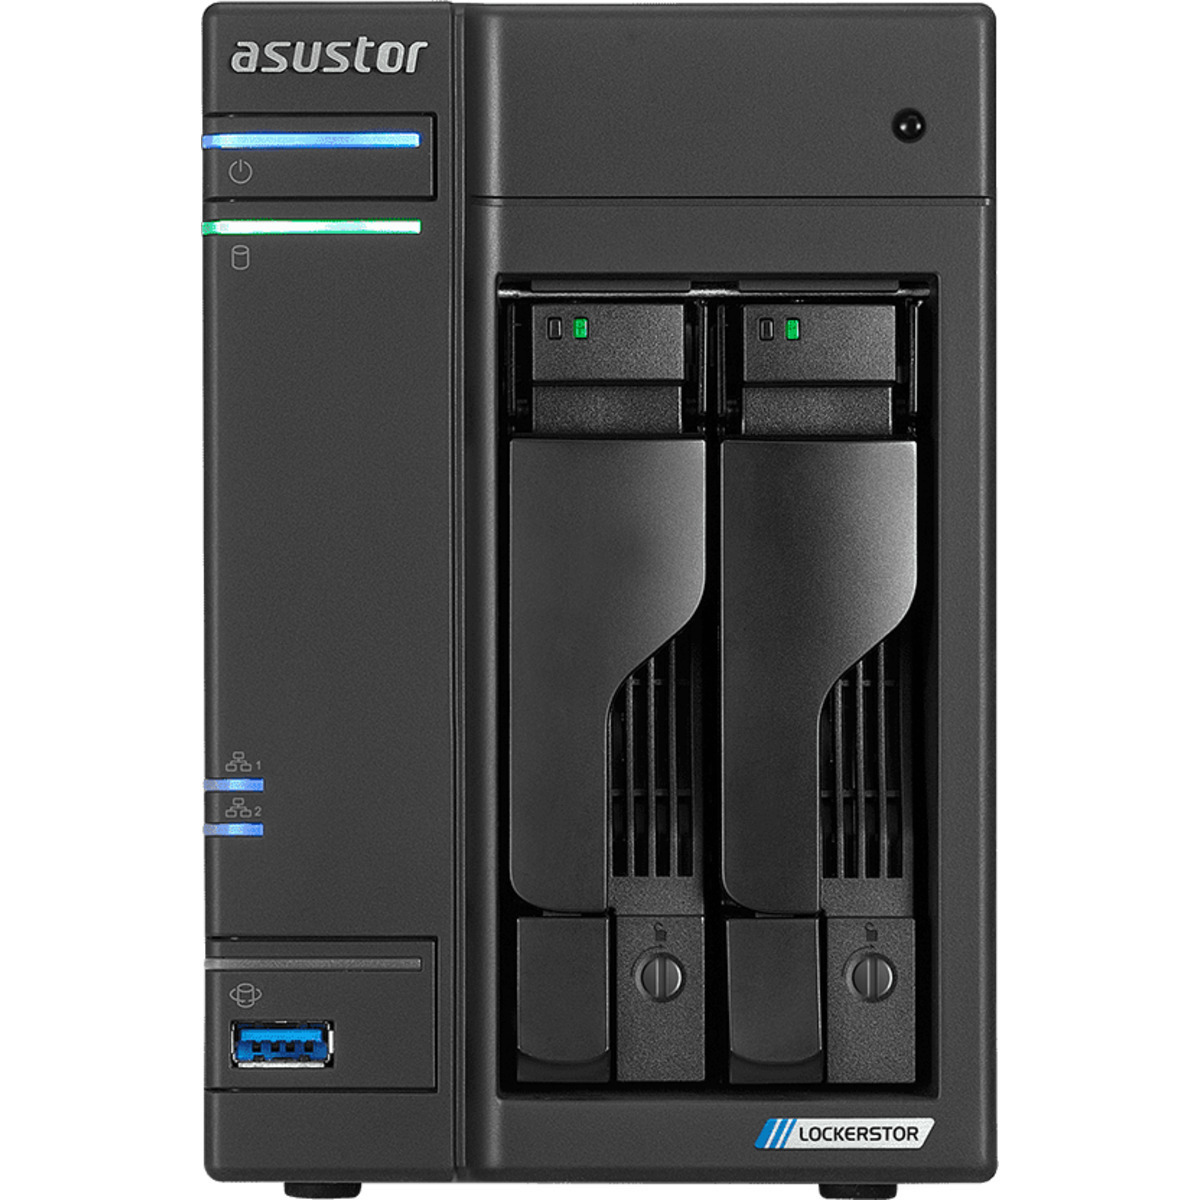 ASUSTOR AS6602T Lockerstor 2 18tb 2-Bay Desktop Multimedia / Power User / Business NAS - Network Attached Storage Device 1x18tb Western Digital Ultrastar DC HC550 WUH721818ALE6L4 3.5 7200rpm SATA 6Gb/s HDD ENTERPRISE Class Drives Installed - Burn-In Tested - FREE RAM UPGRADE AS6602T Lockerstor 2